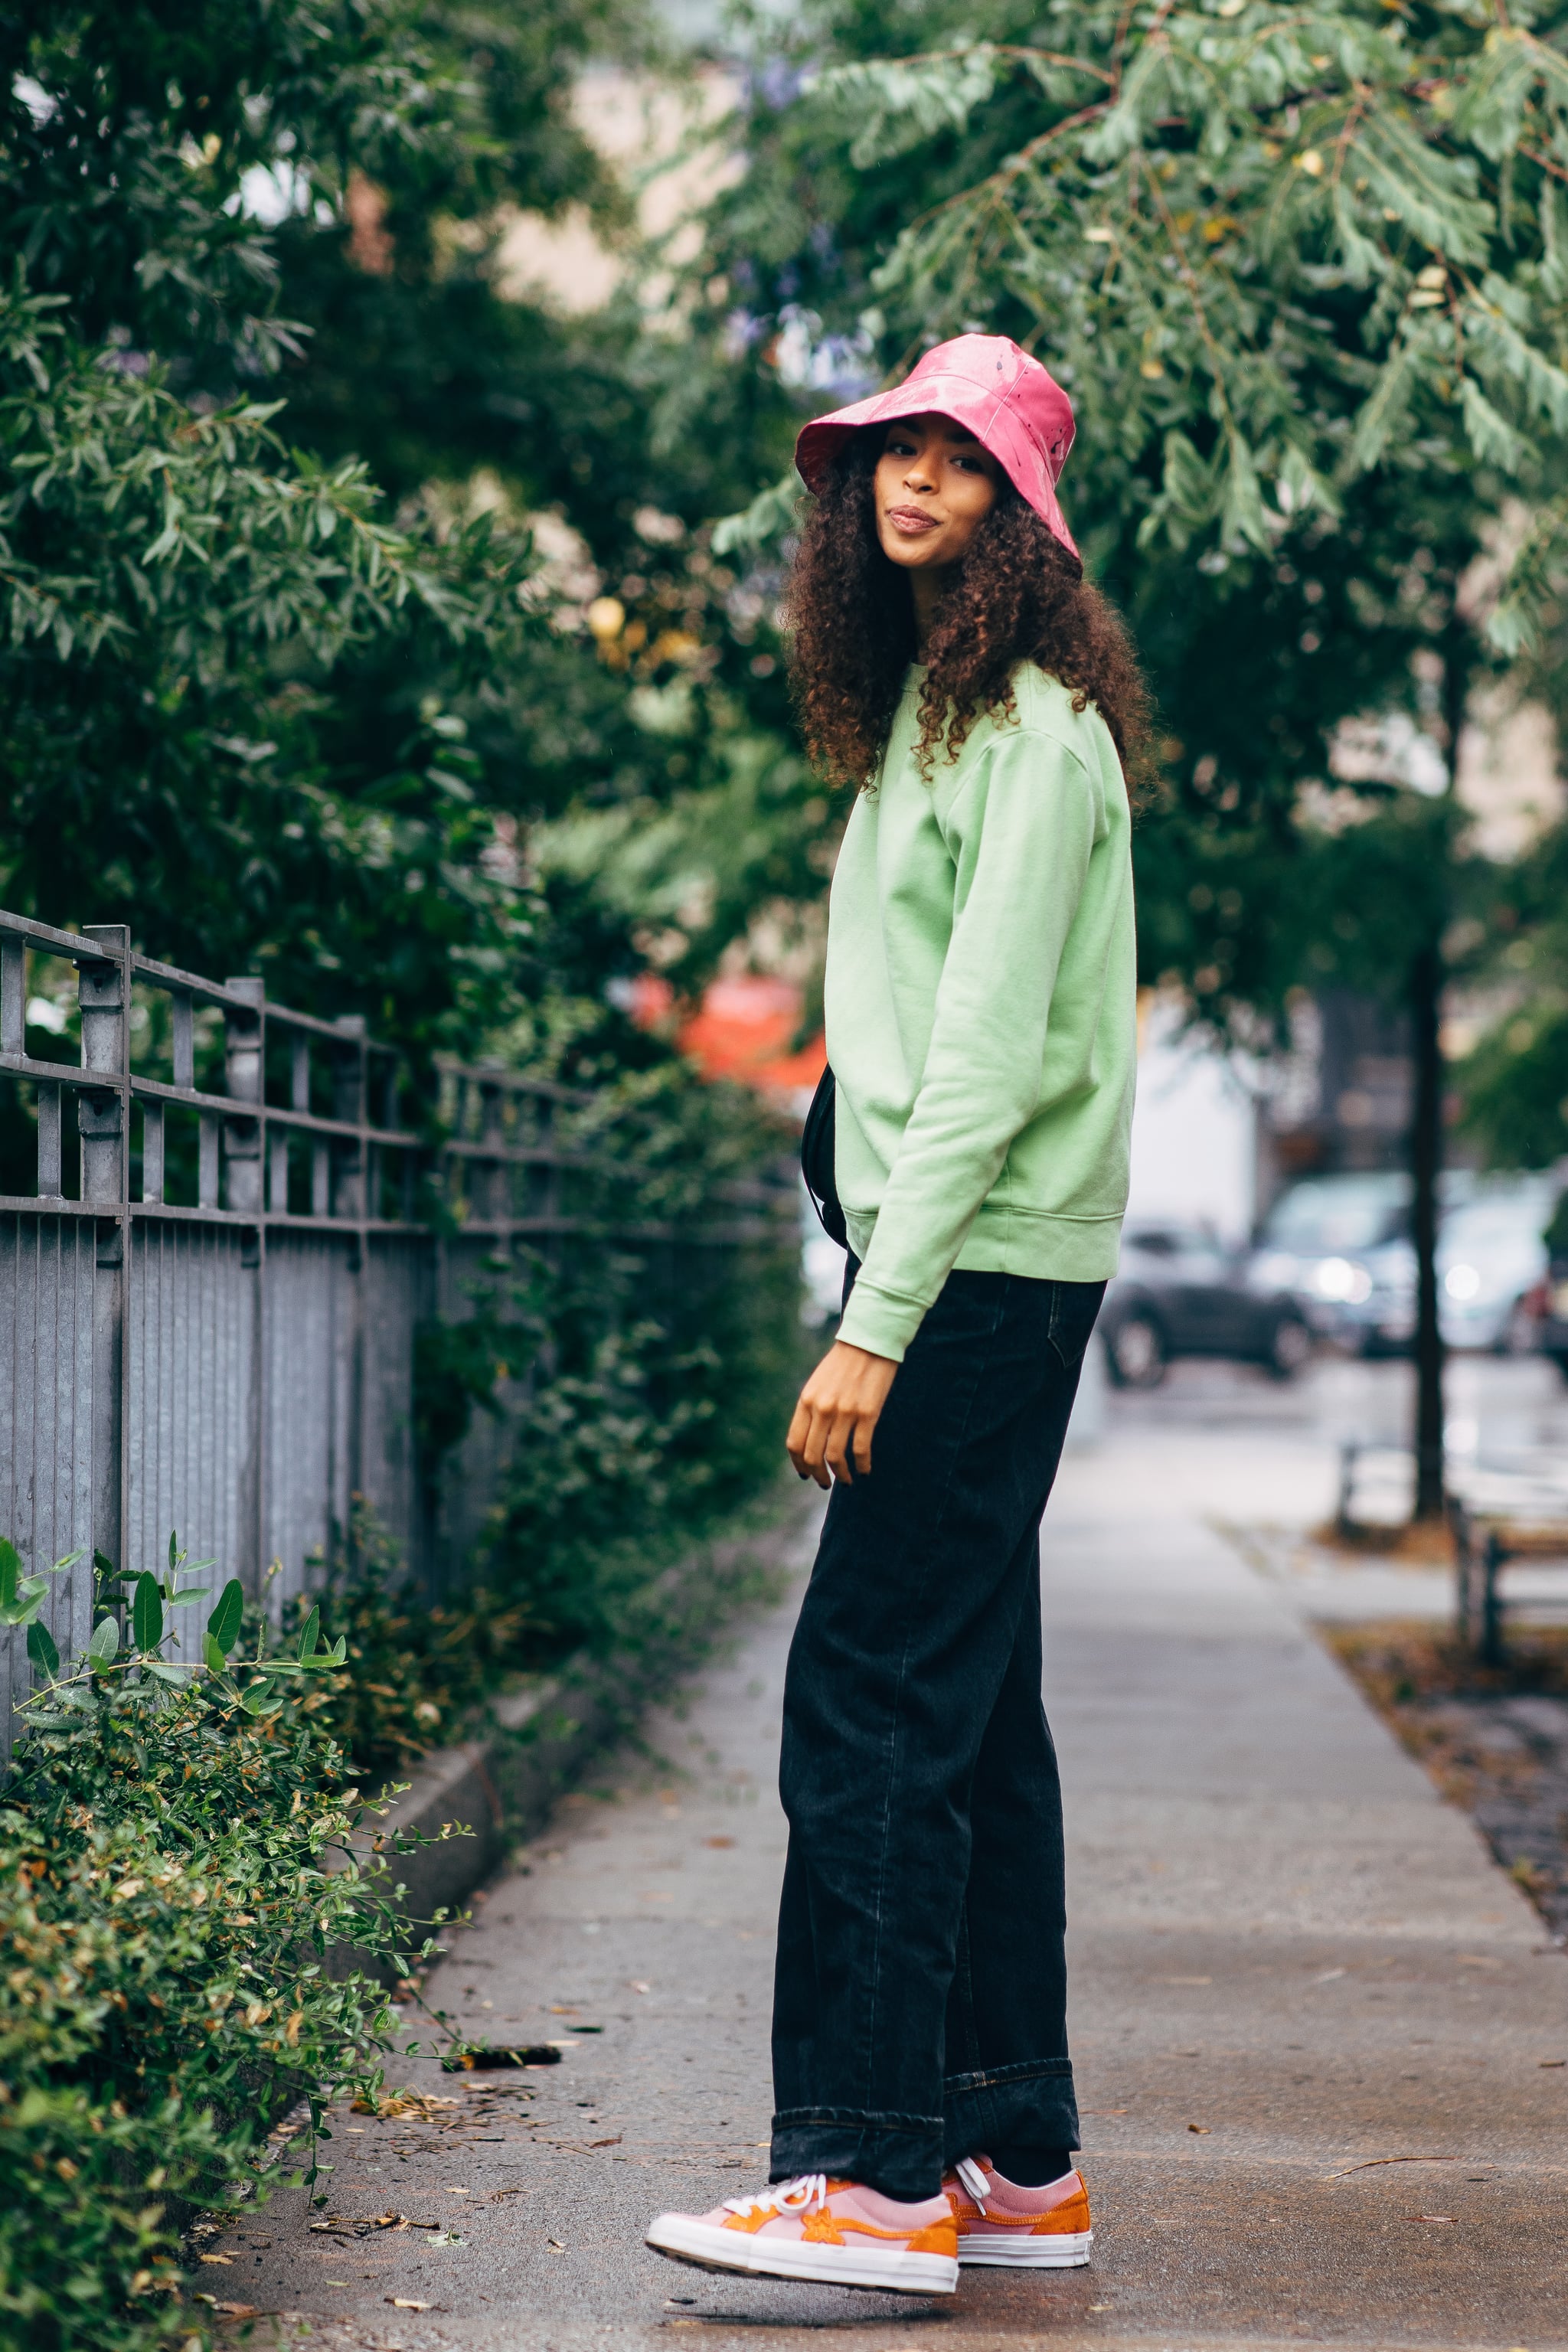 Bucket Hats The Biggest Fashion Trends Of 2019 Are Here Can